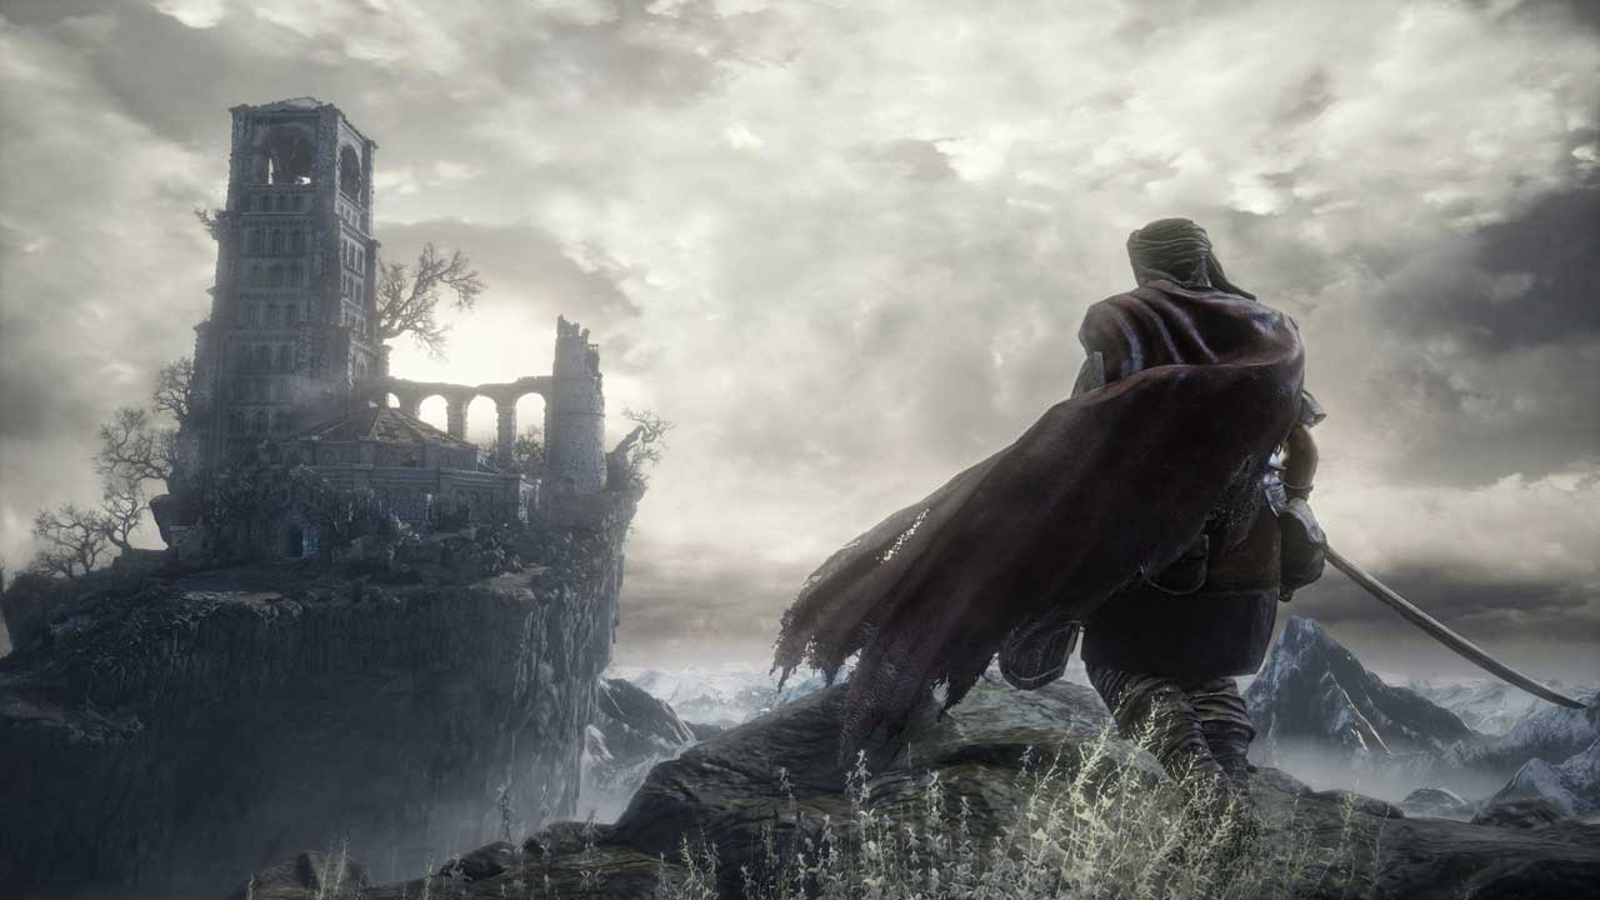 Dark Souls 3: Snuggly the Crow trading guide | VG247